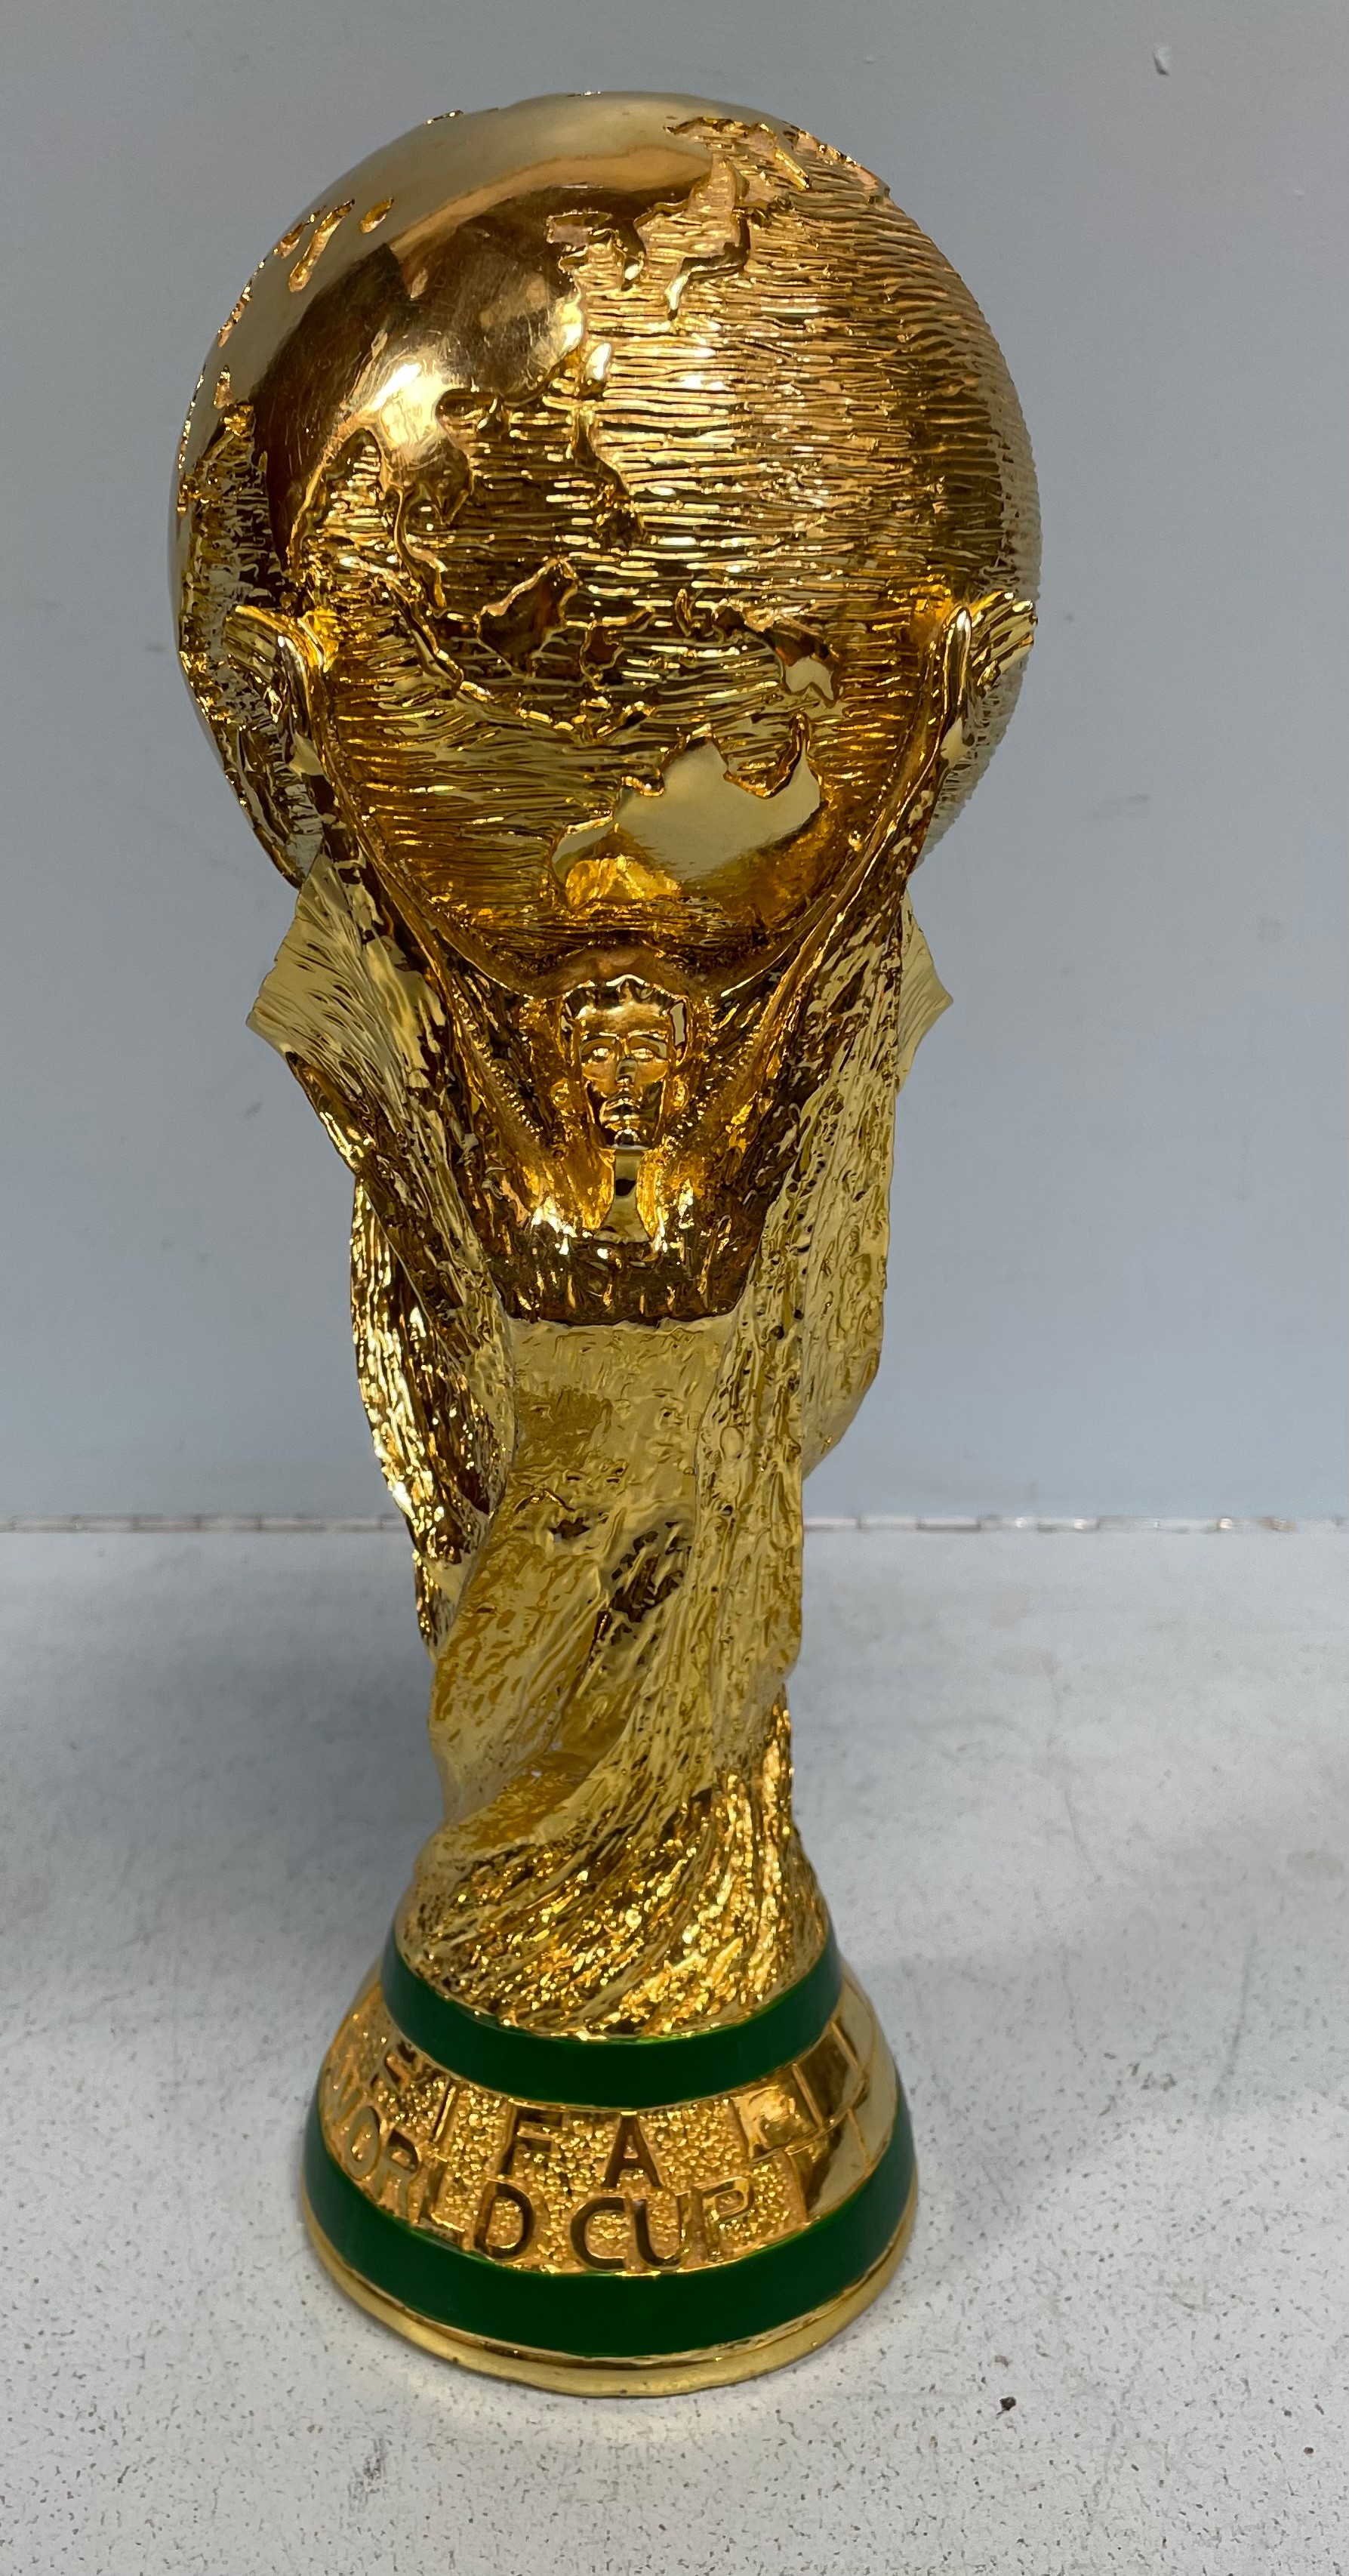 A large replica of the Fifa World Cup trophy, after Silvio Gazzaniga, with two maidens holding a - Image 2 of 3